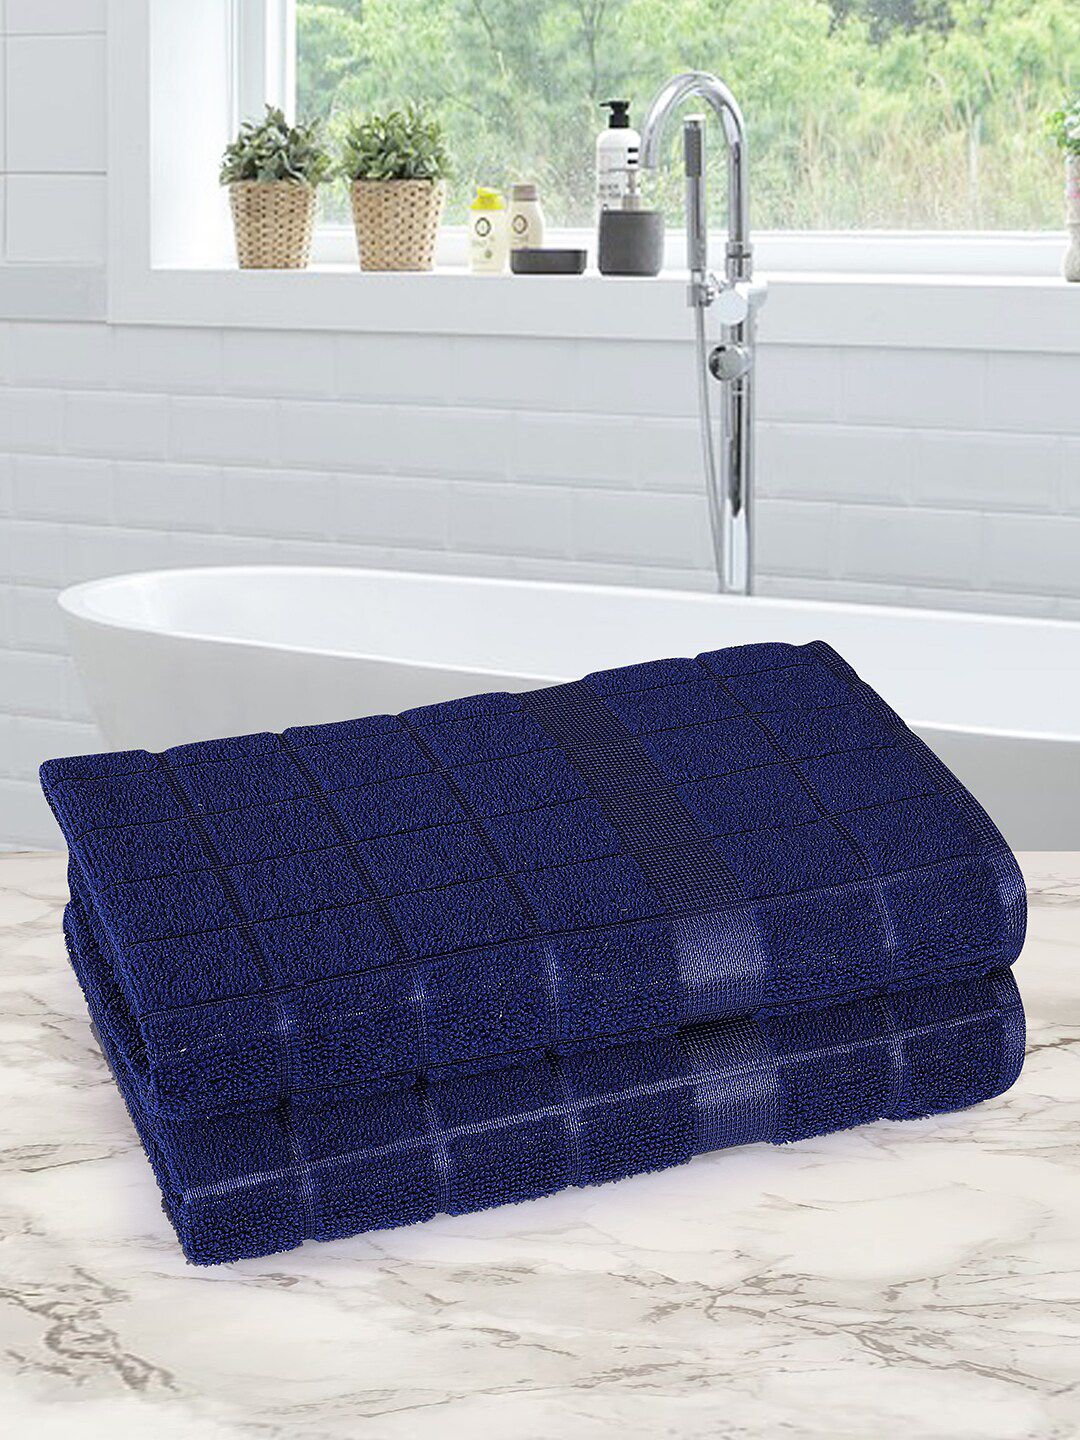 ROMEE Set Of 2 Navy Blue Self-Design 500 GSM Cotton Towels Price in India